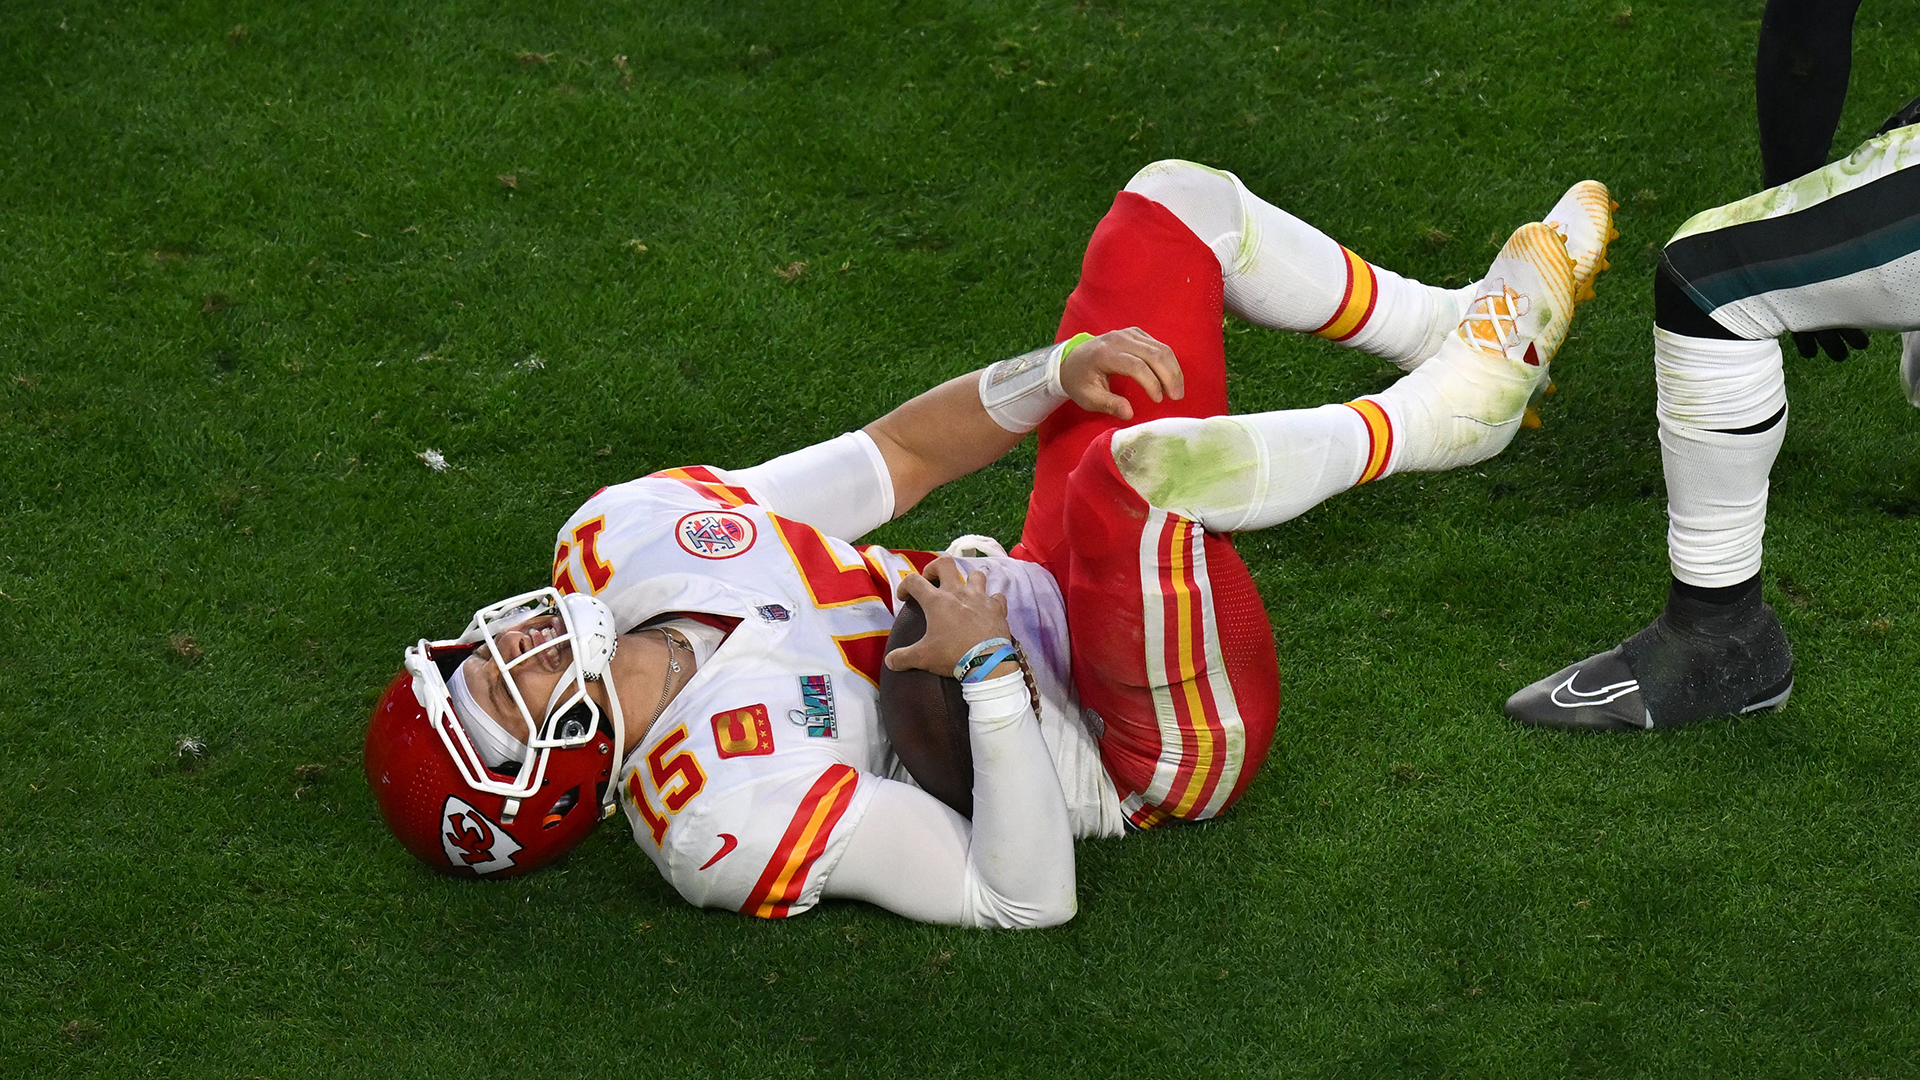 Kansas City Chiefs' quarterback Patrick Mahomes in pain of a hurt ankle during Super Bowl LVII between the Kansas City Chiefs and the Philadelphia Eagles at State Farm Stadium in Glendale, Arizona, on February 12, 2023.